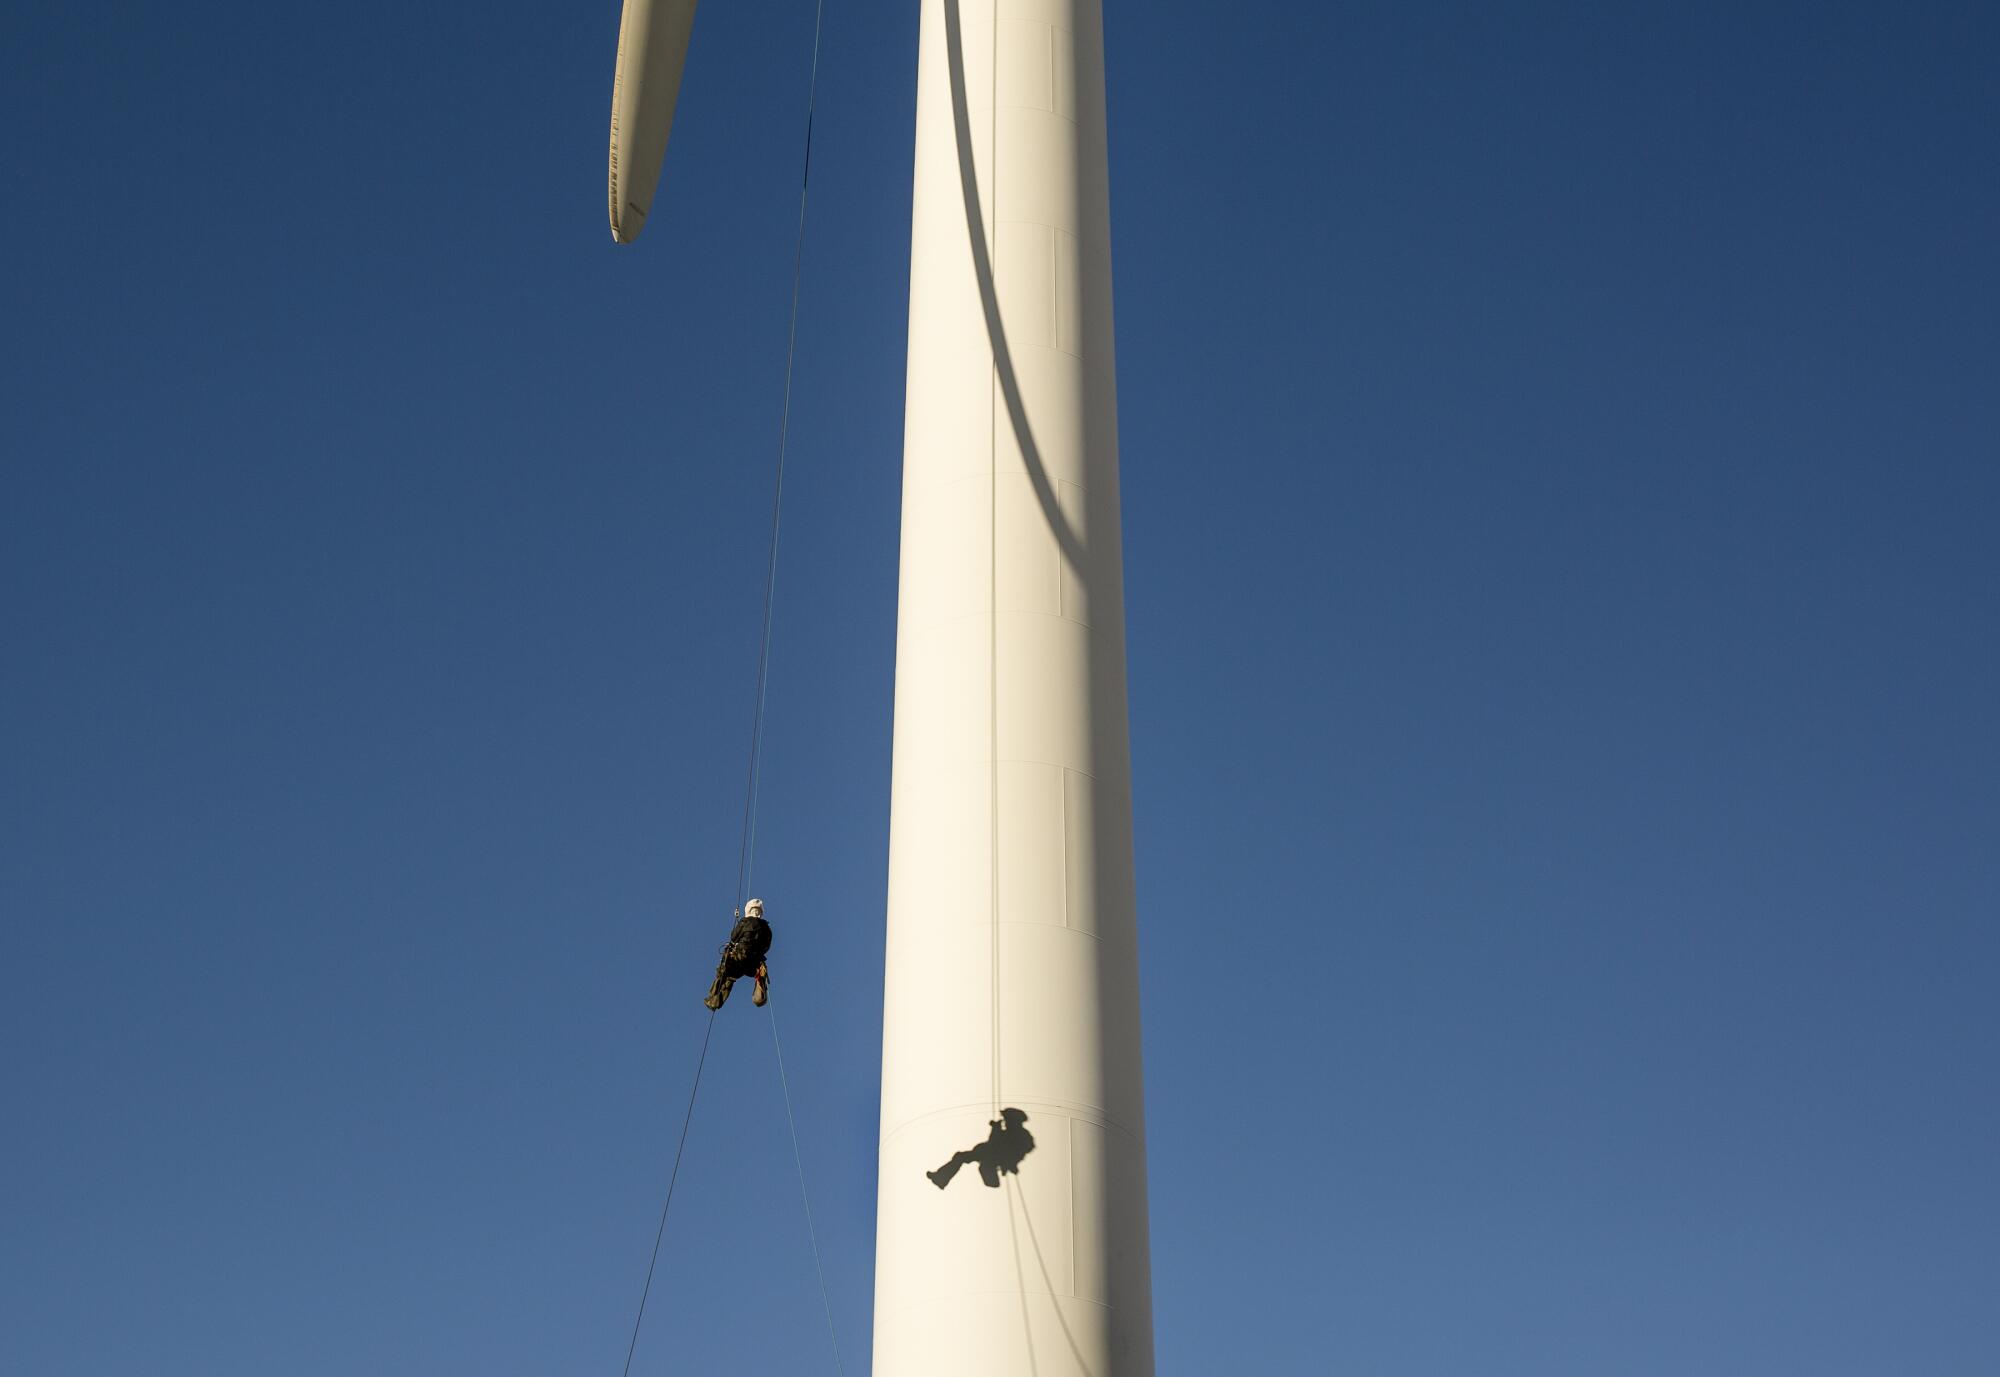 A person hangs from a wind turbine.